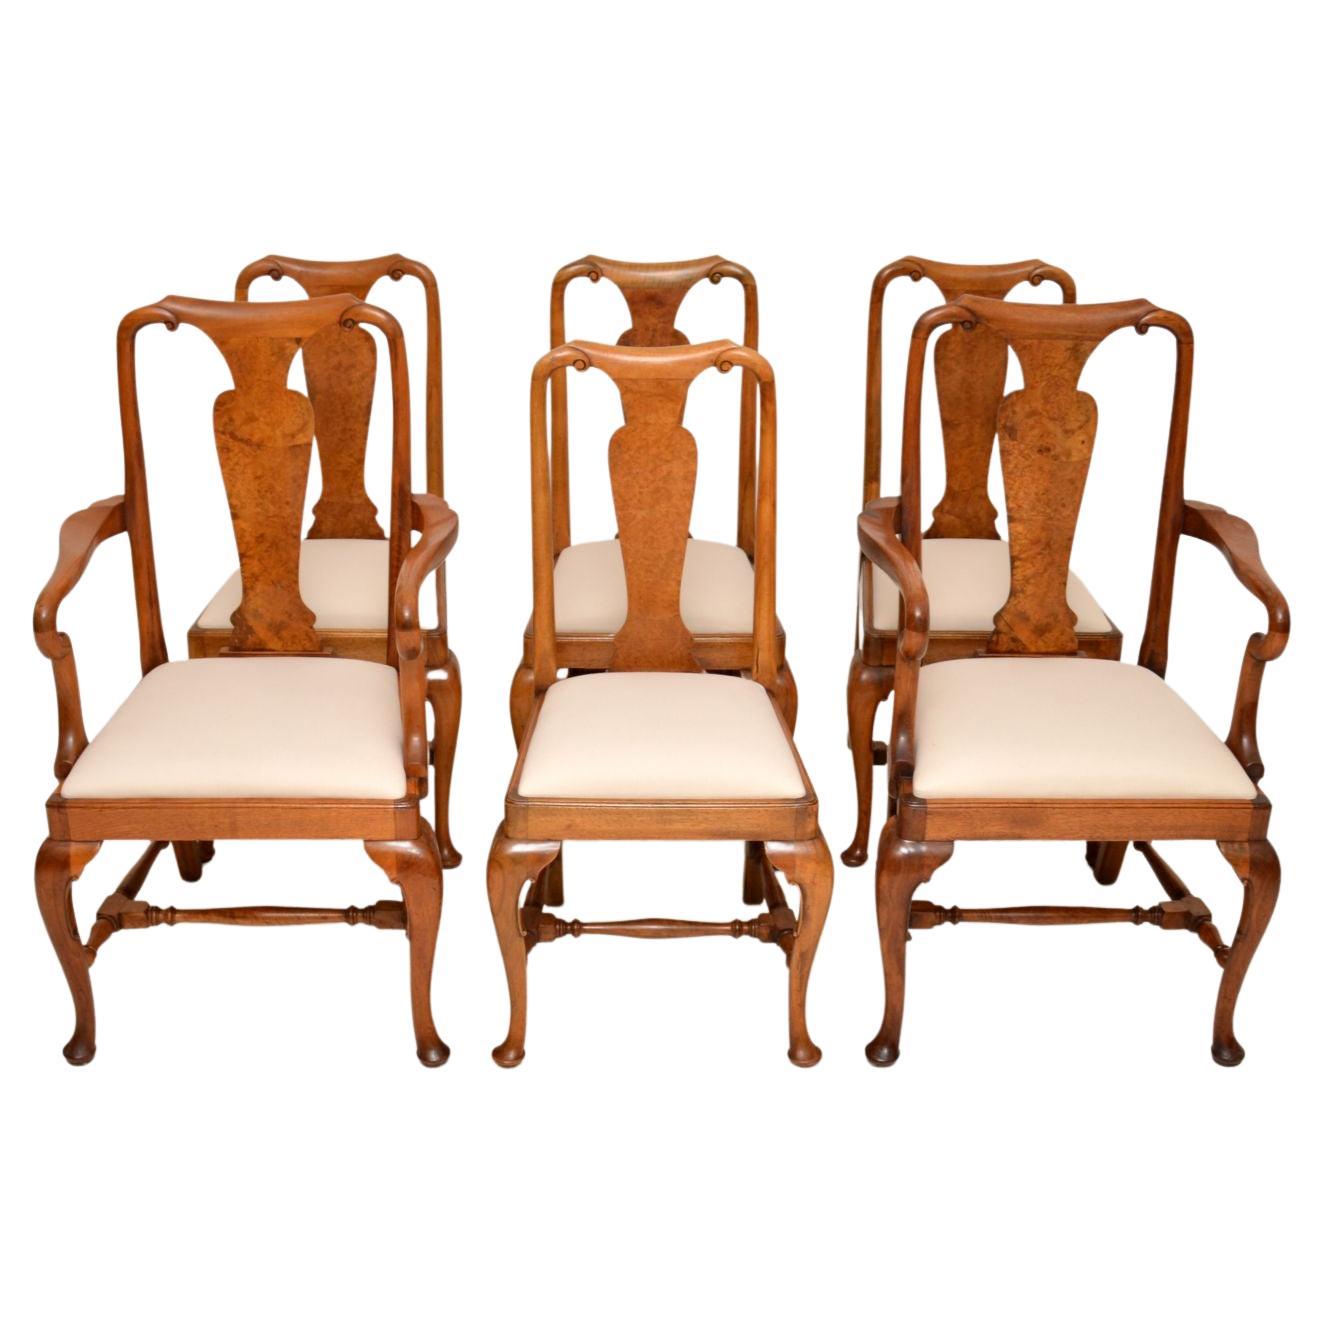 Set of 6 Antique Walnut Dining Chairs